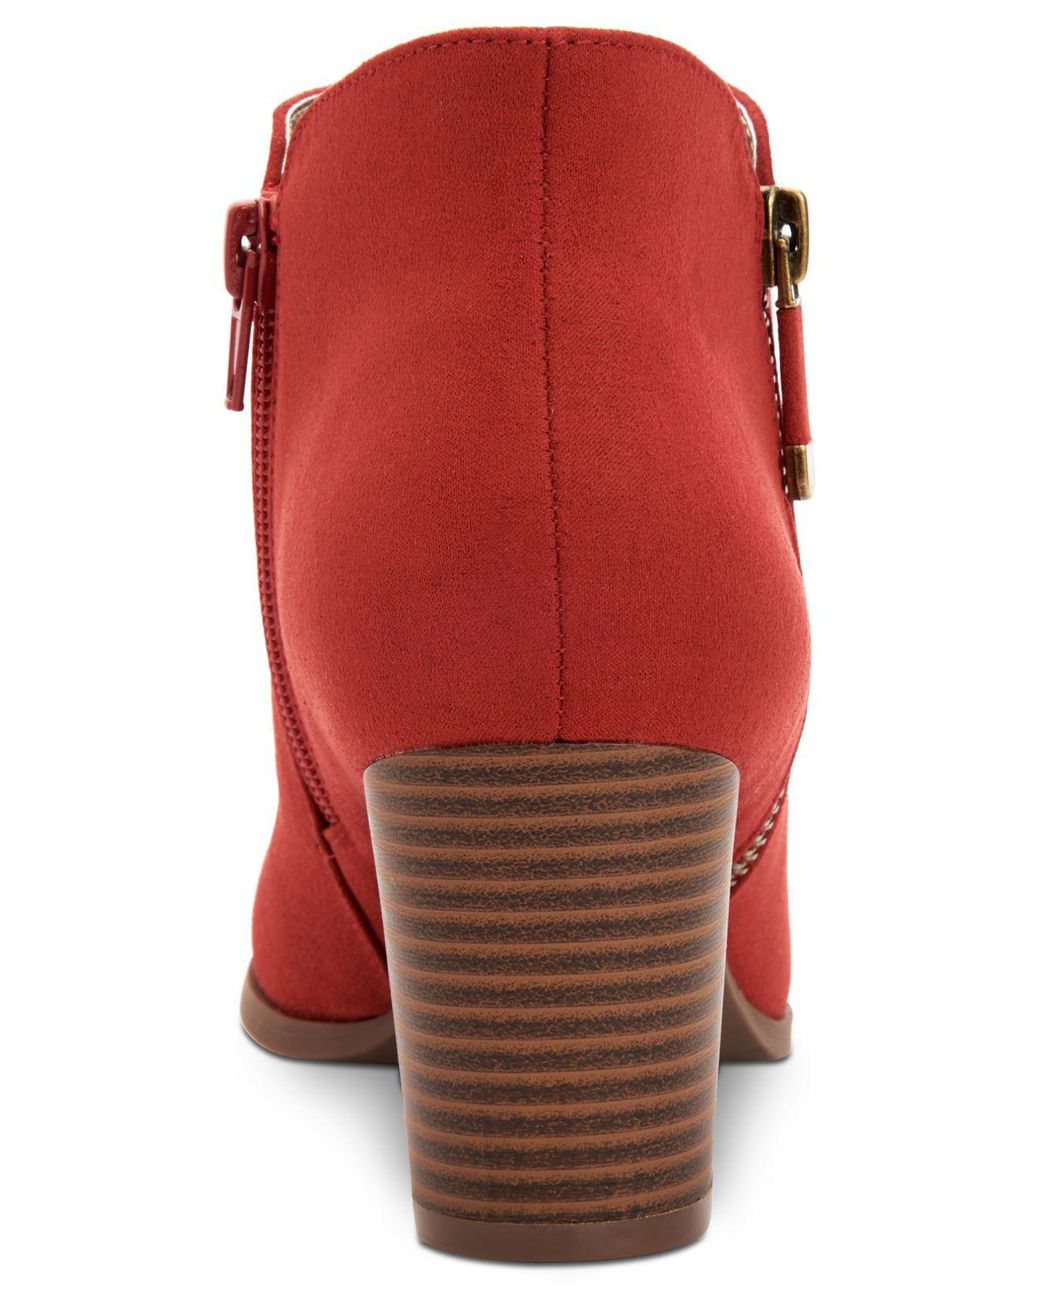 macy's red leather boots